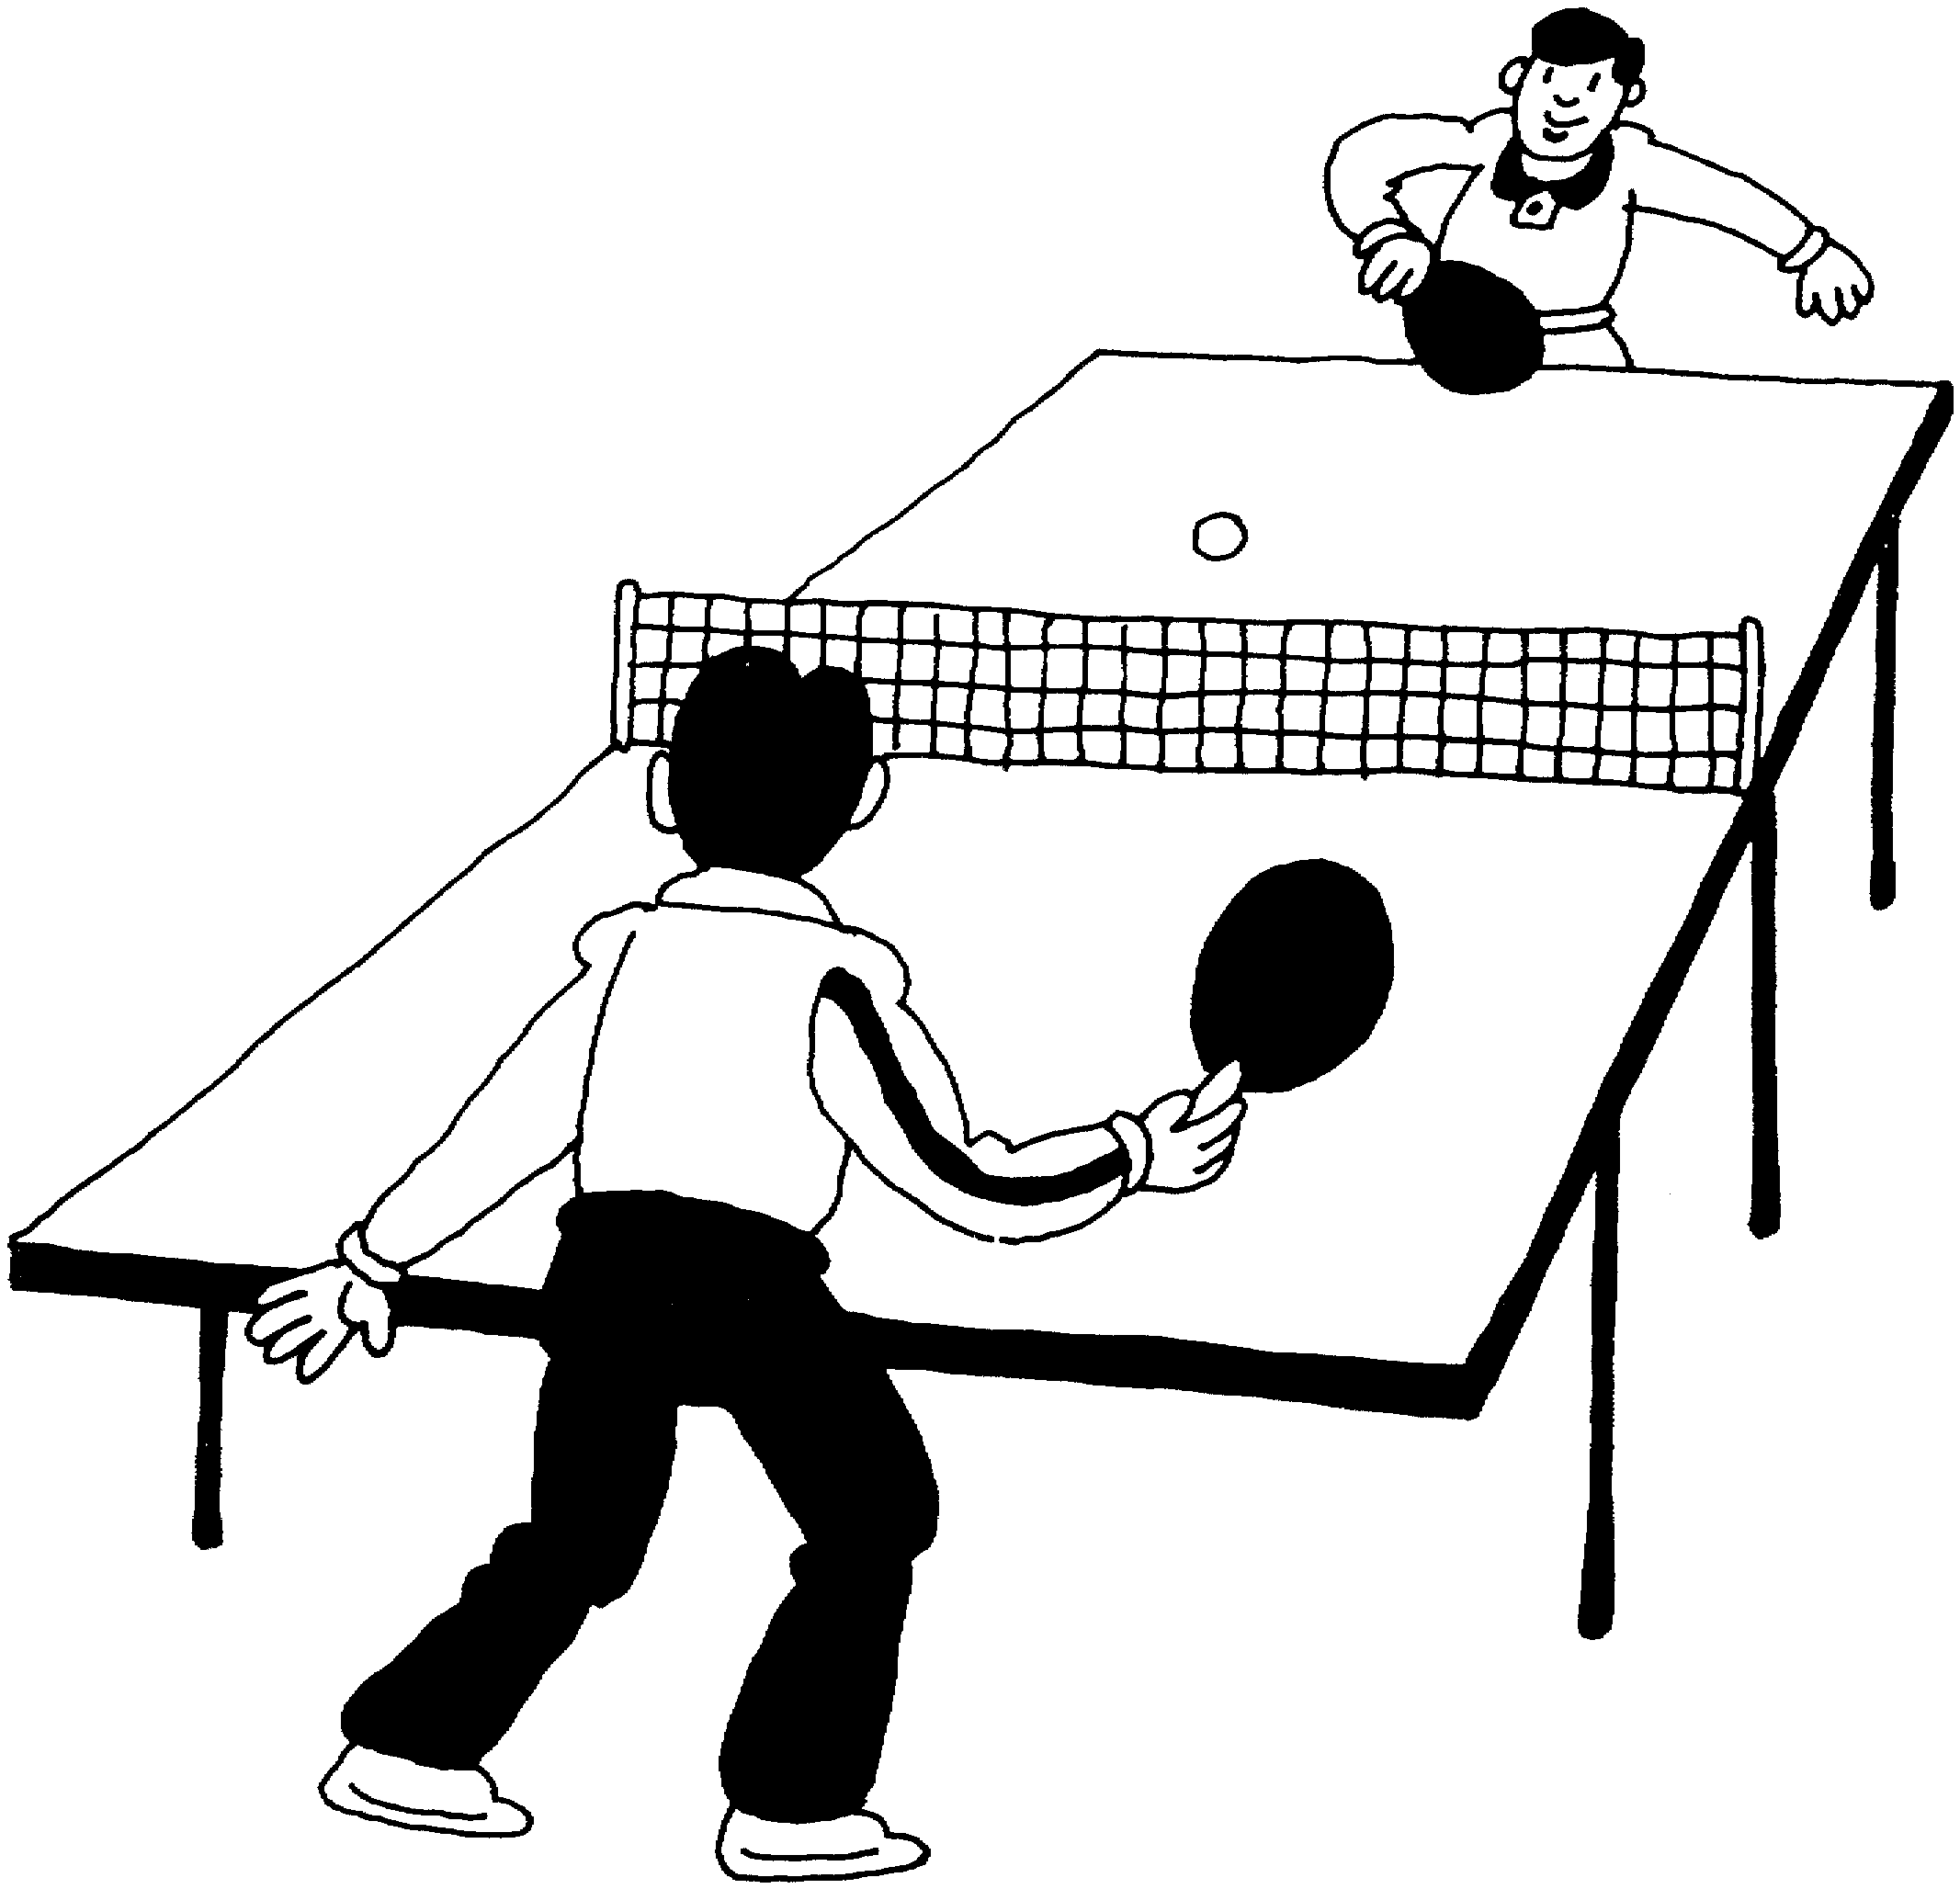 table tennis images clipart - Clipground